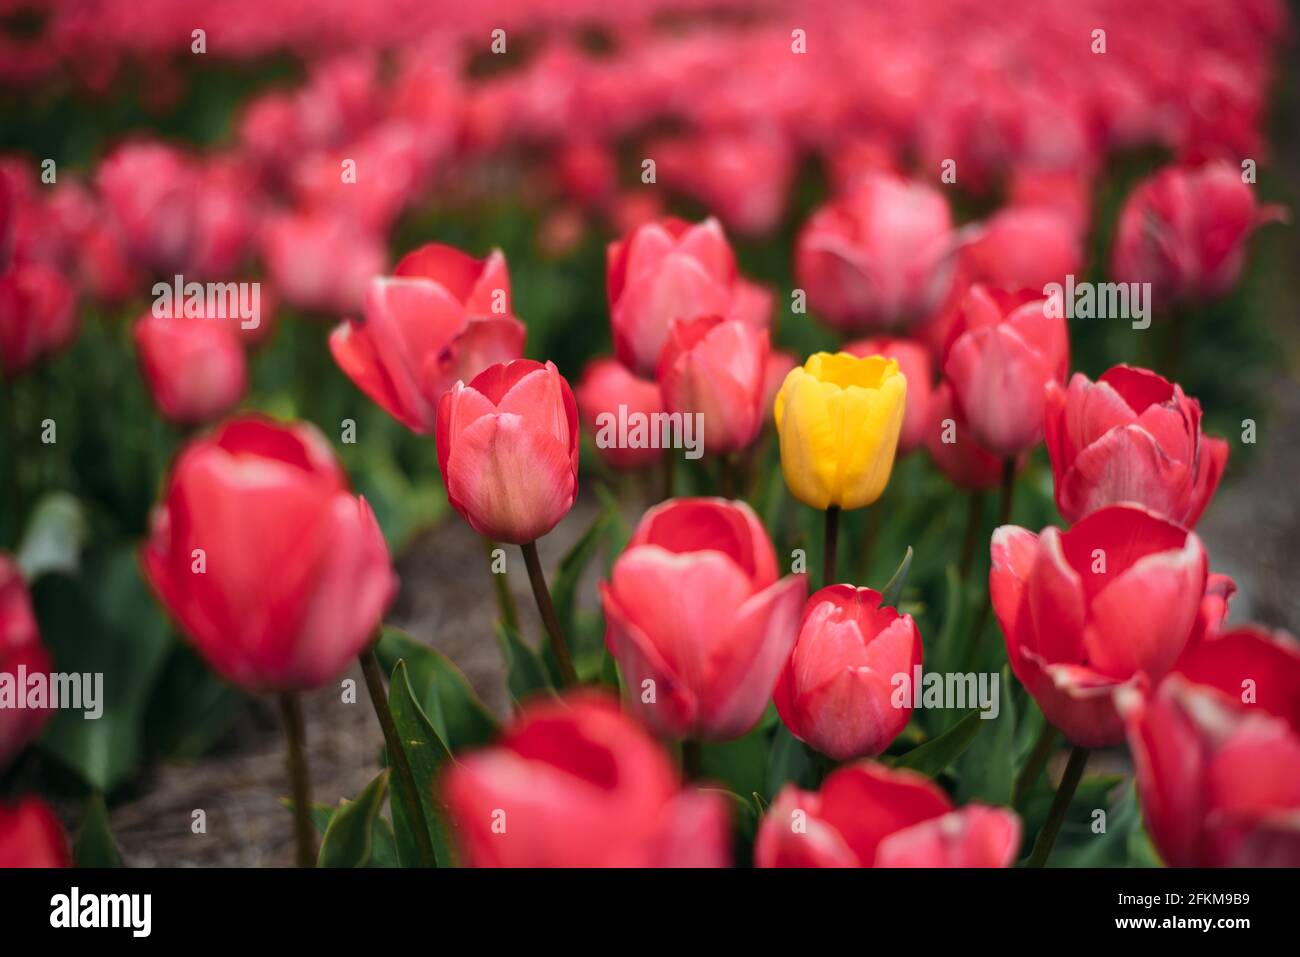 Single yellow tulip flower in a field of pink tulips Stock Photo